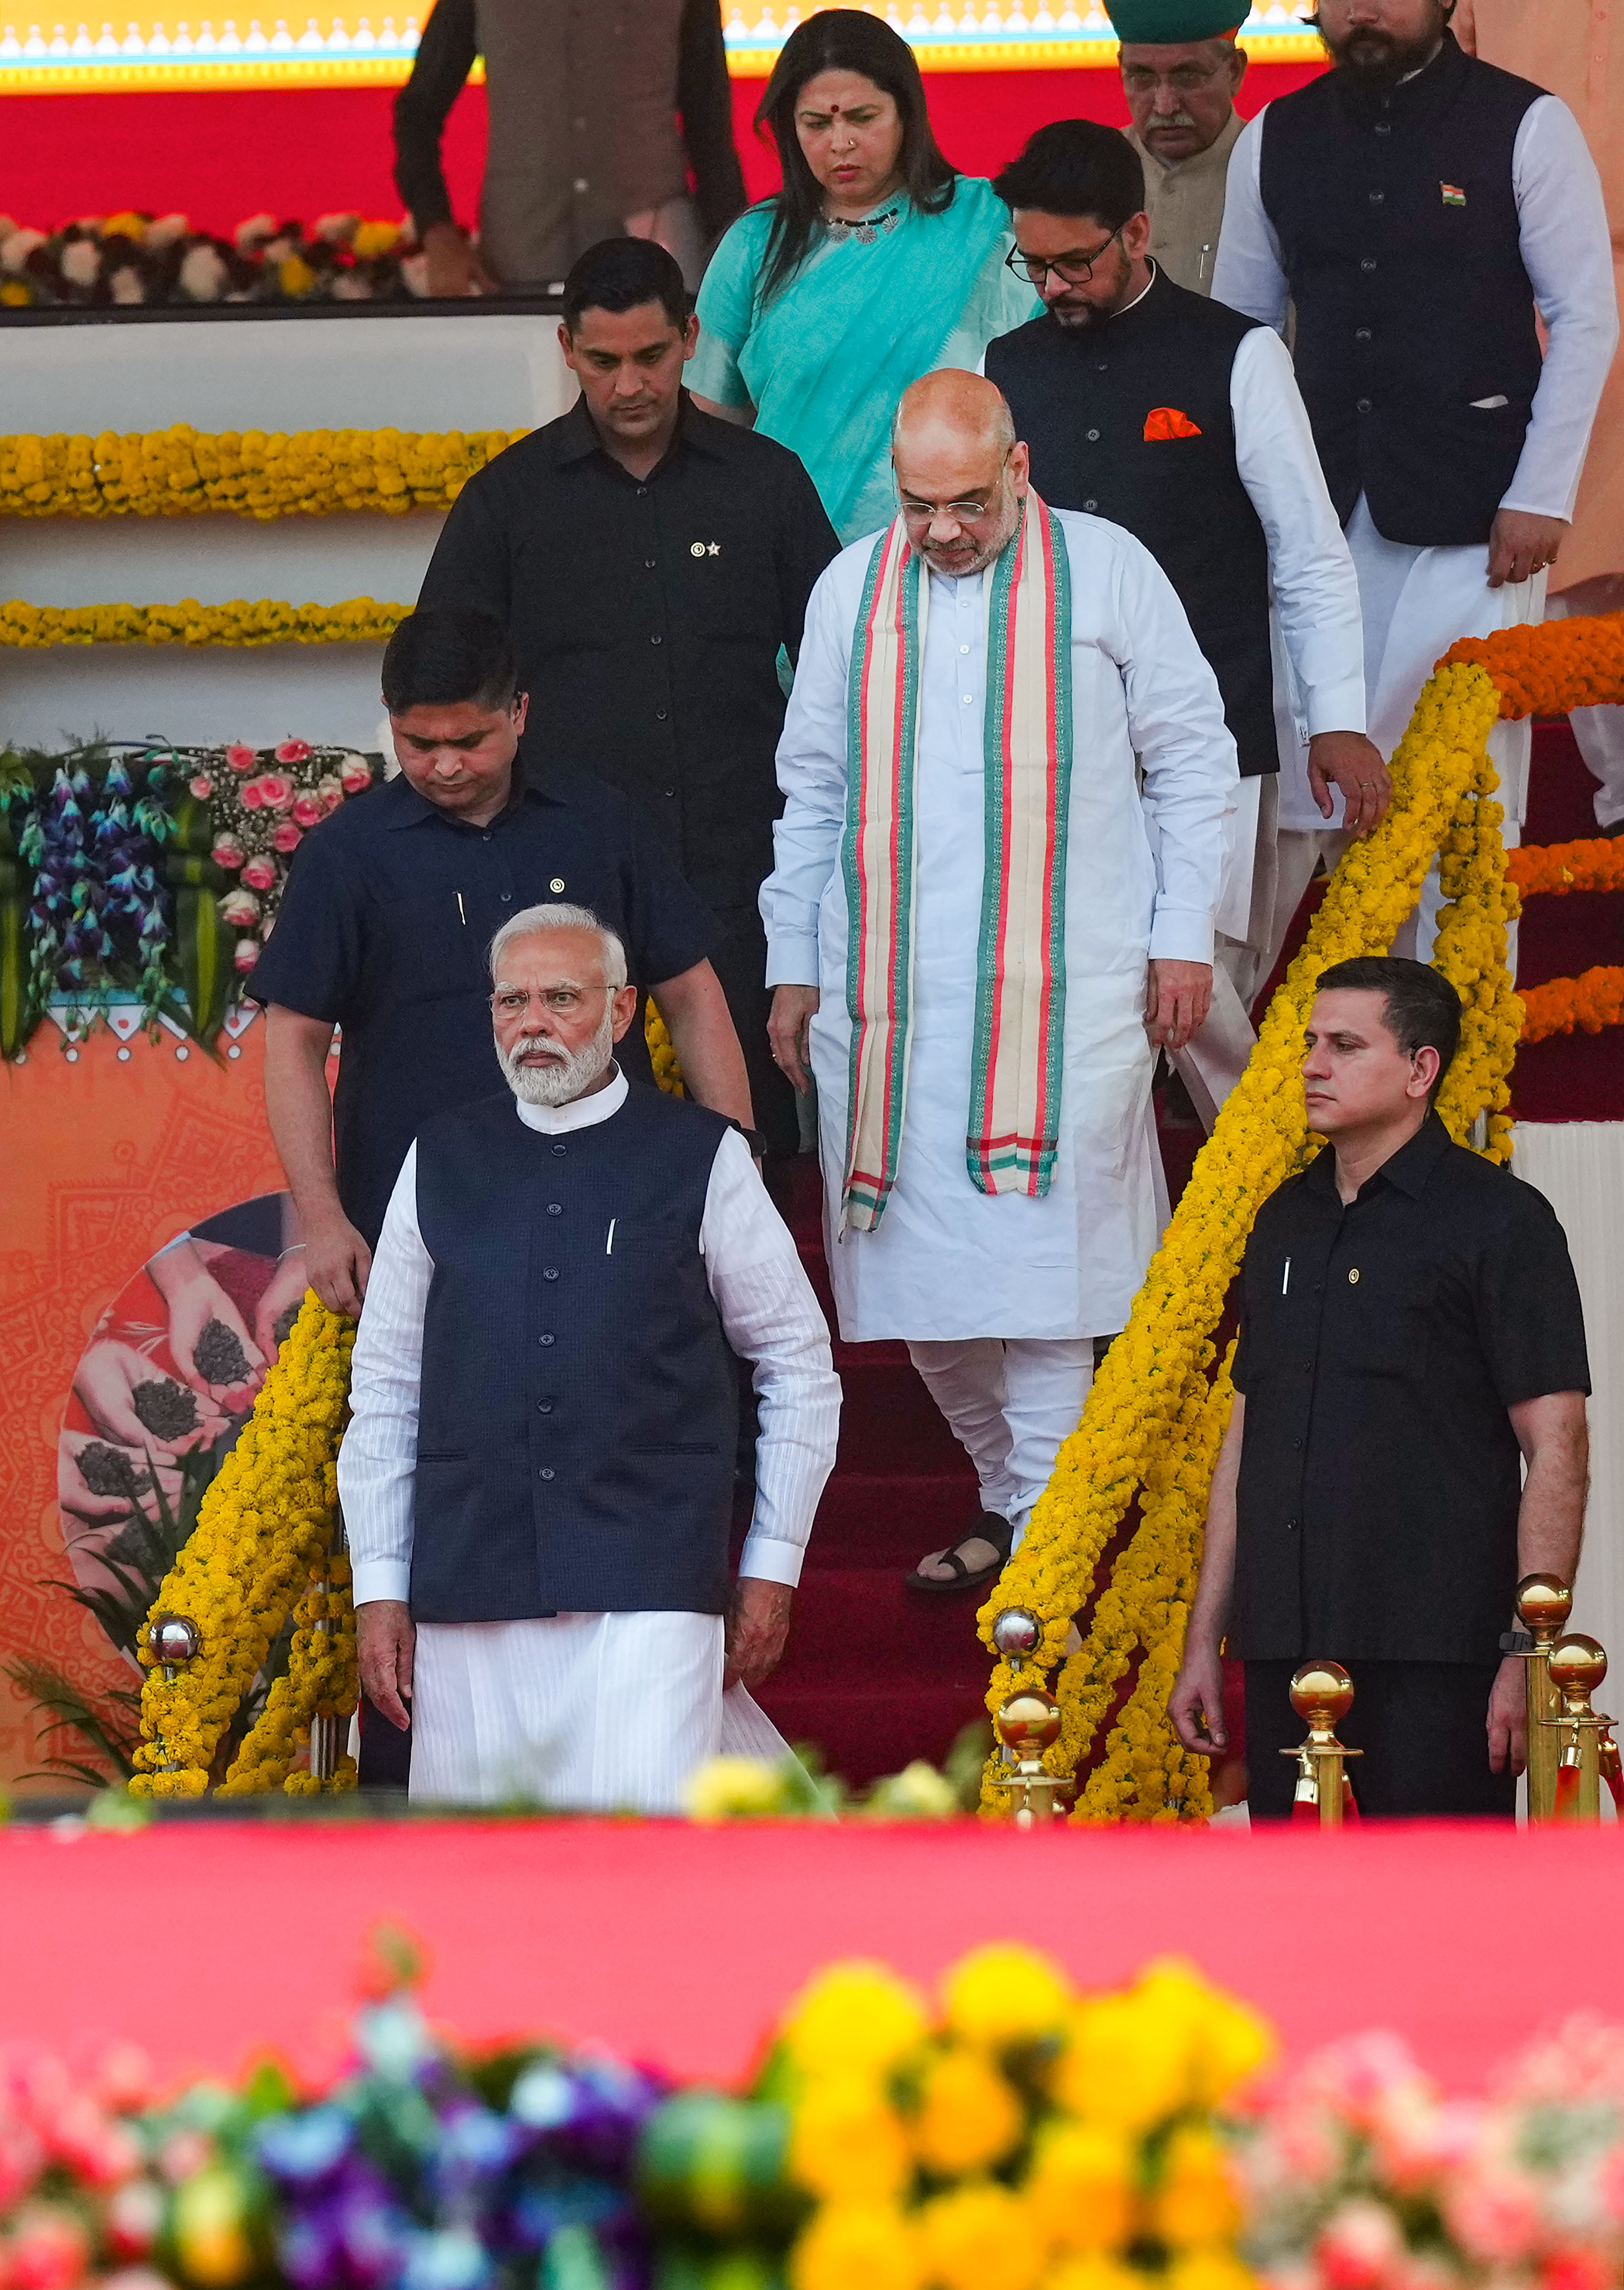 Prime Minister Narendra Modi during an event marking the culmination of the 'Meri Maati Mera Desh' campaign, in New Delhi, on Tuesday. Union Ministers Amit Shah, Meenakashi Lekhi and Anurag Thakur are also seen. -PTI